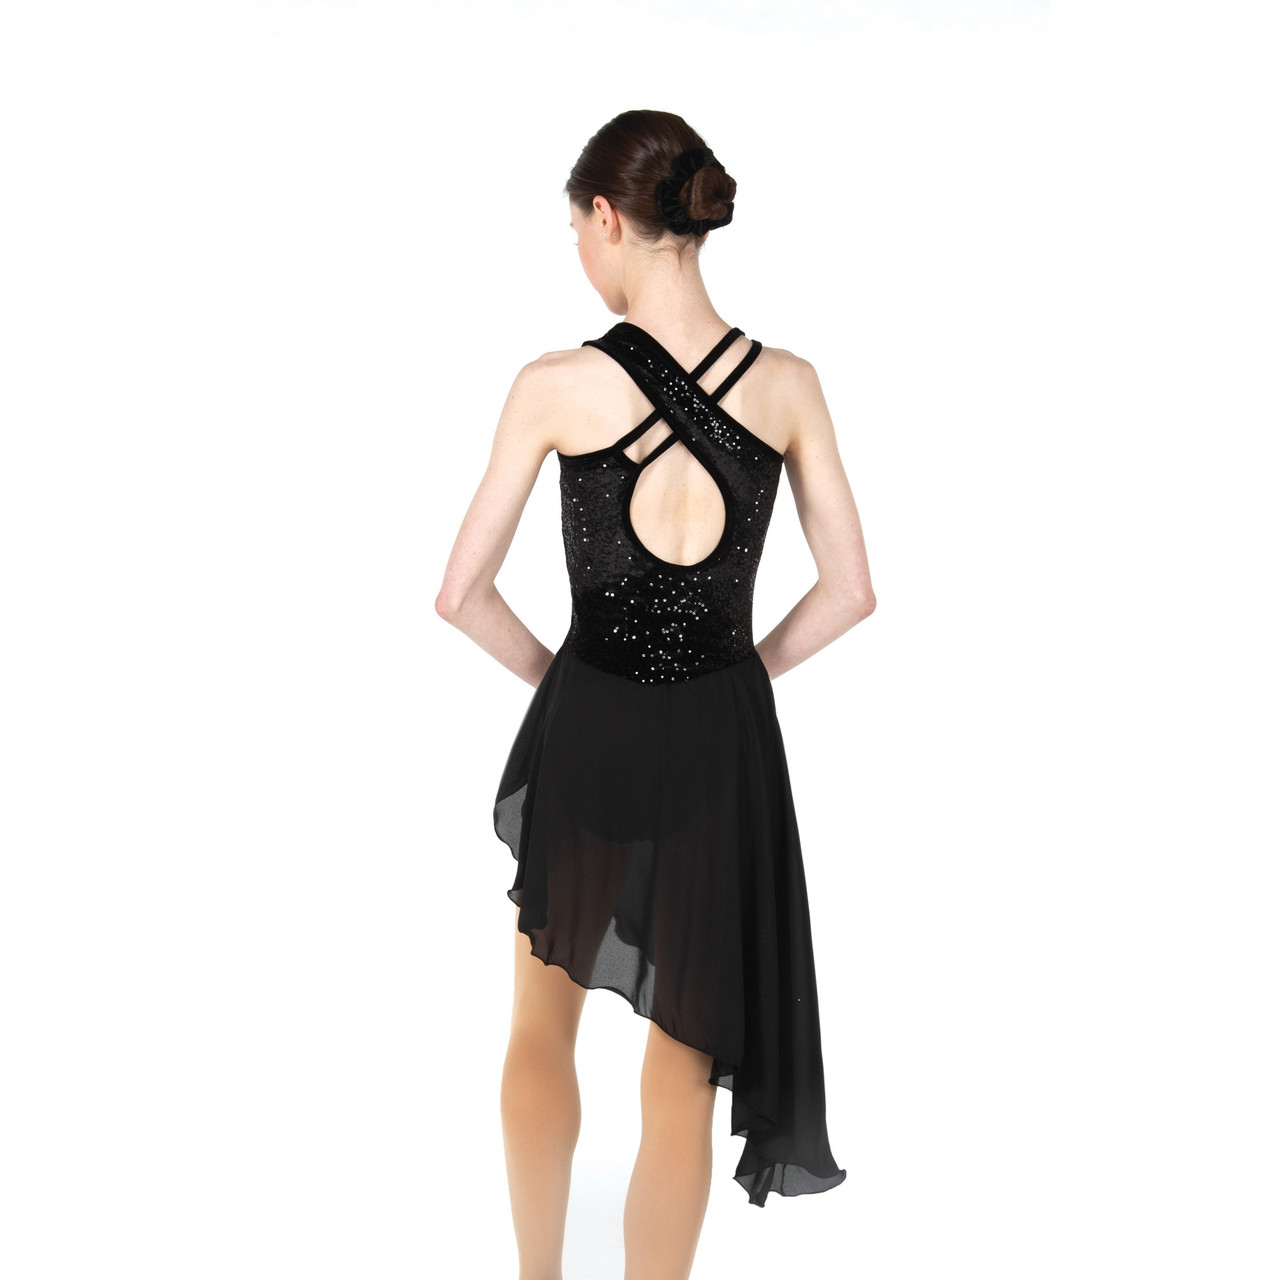 Jerry's Ice Skating Dress - 106 Sequin Chasse Dress (Black)